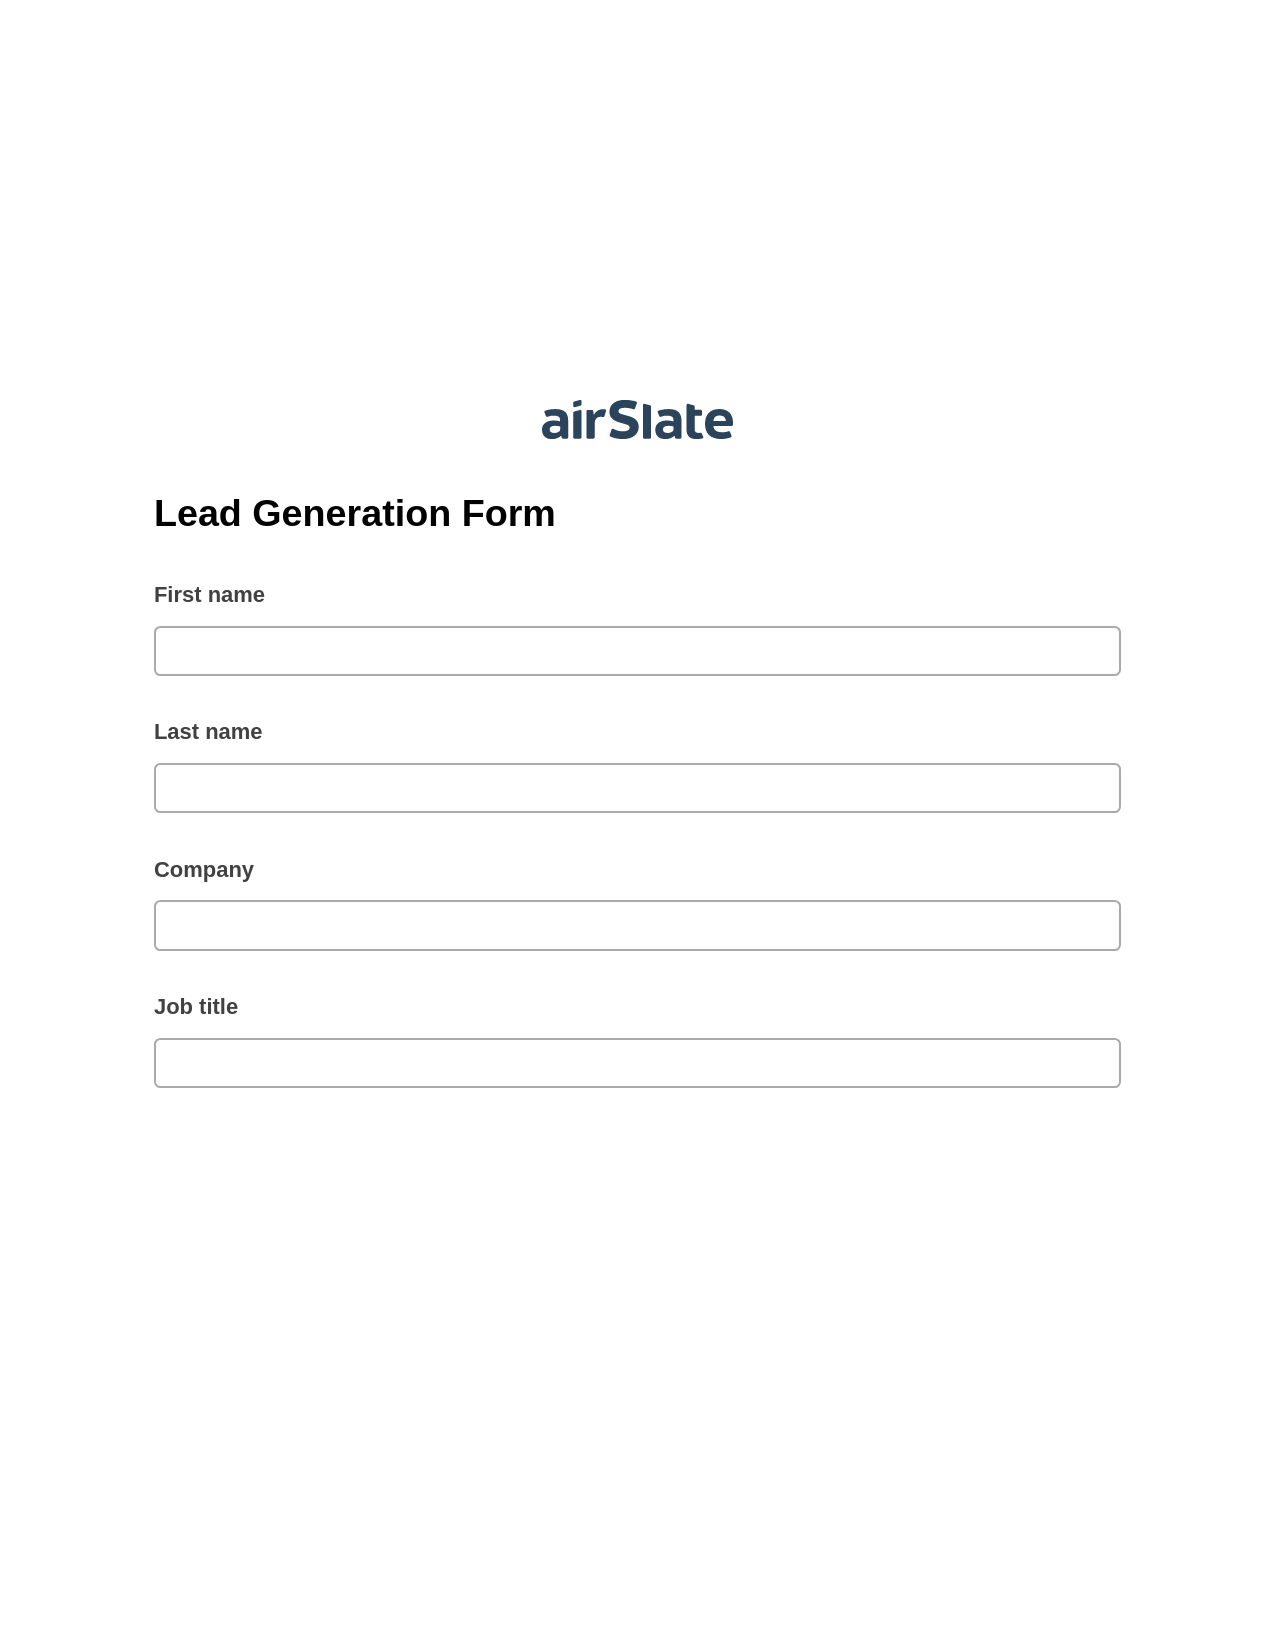 Multirole Lead Generation Form Pre-fill from Google Sheets Bot, Send a Slate with Roles Bot, Post-finish Document Bot